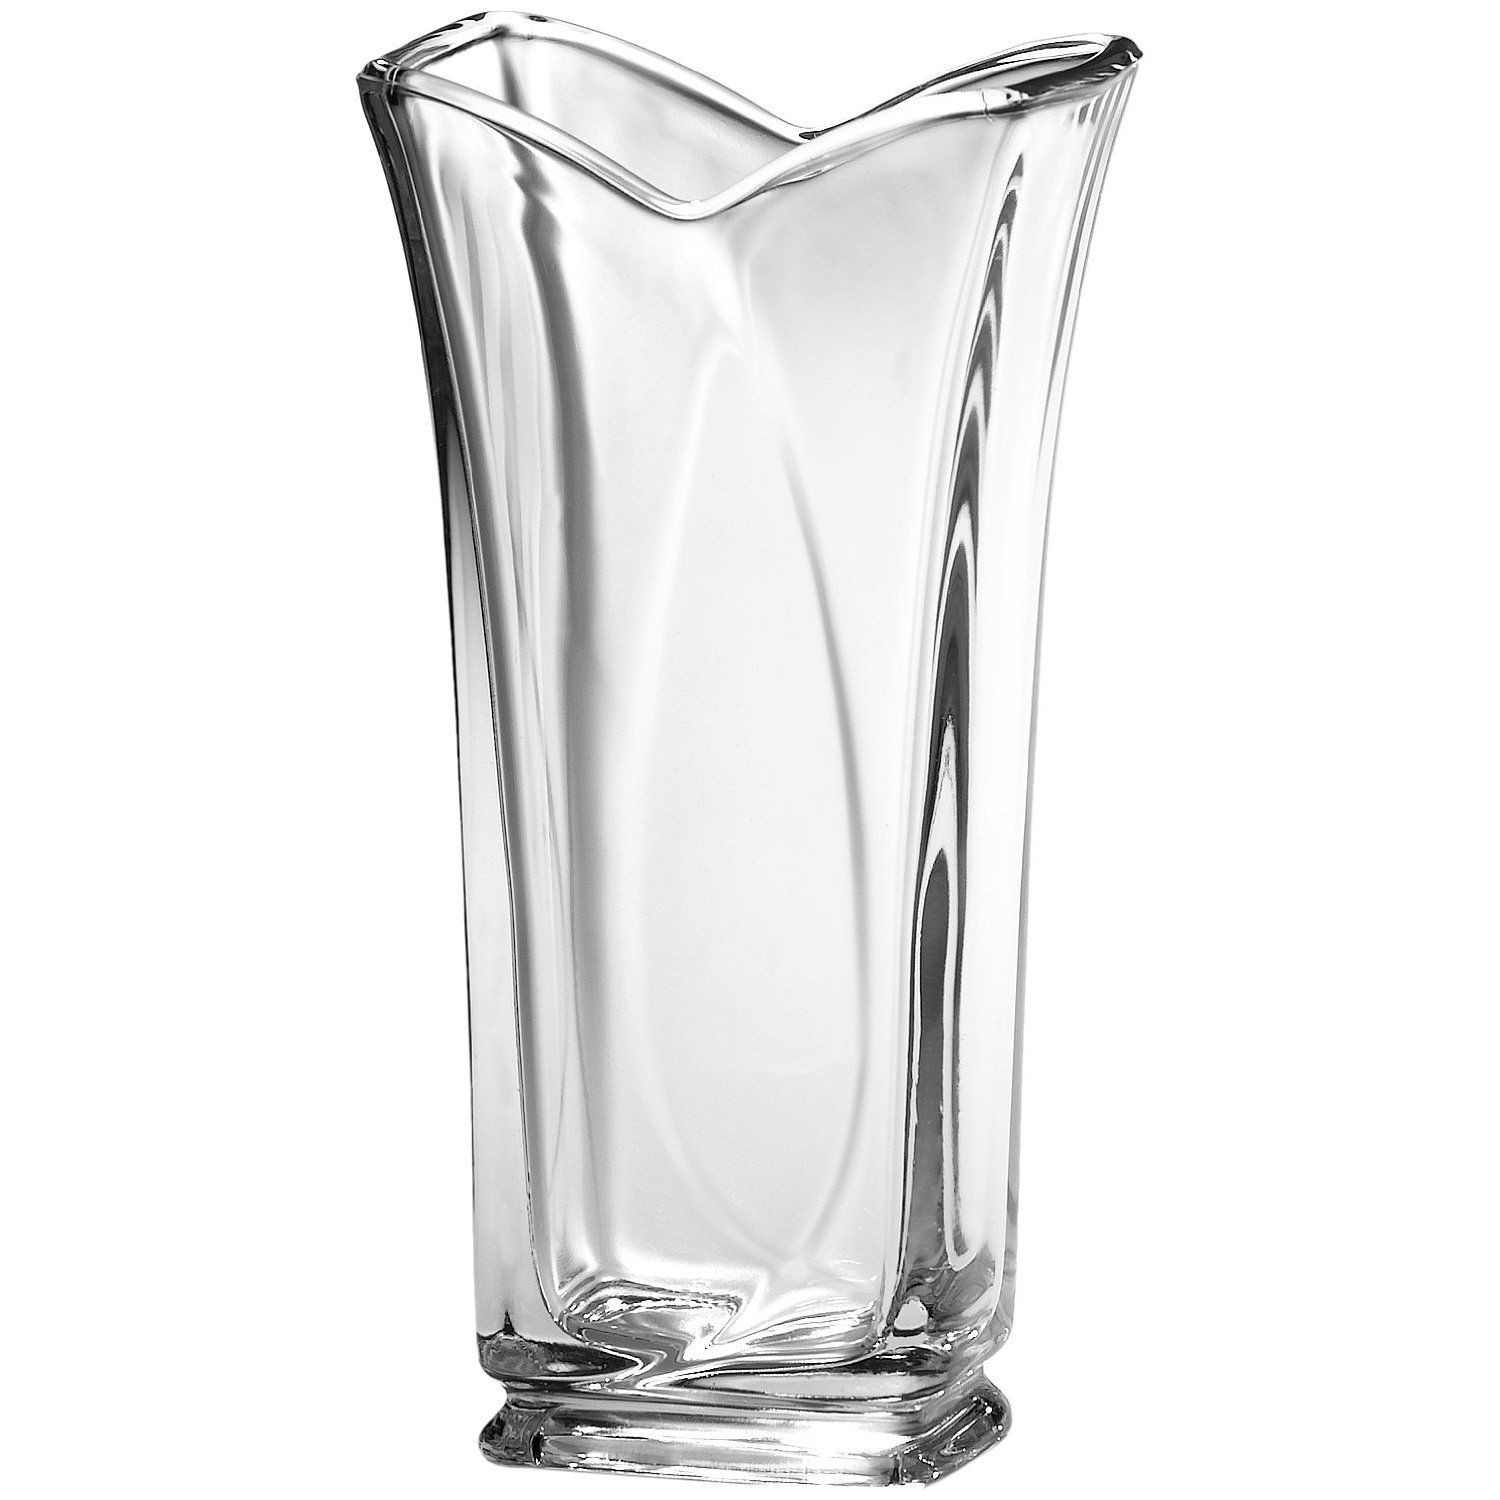 13 attractive 24 Inch Glass Vase 2024 free download 24 inch glass vase of flower vase glass vase pinterest flowers vase glasses and vase inside flower vase glass